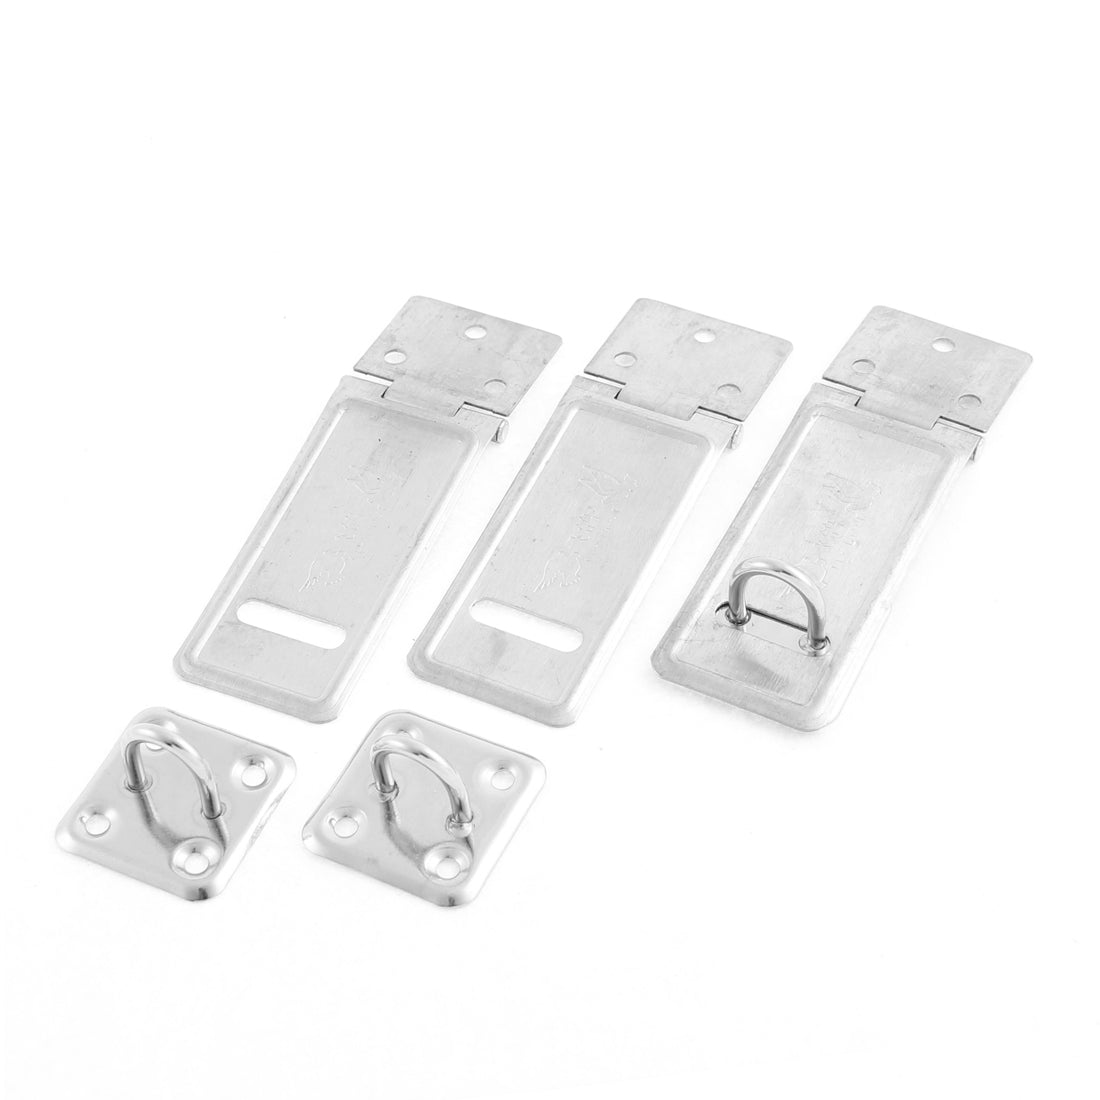 uxcell Uxcell Door Cupboard Hardware Stainless Steel Padlock Clasp Hasp 3 Inch Long 3 Pcs